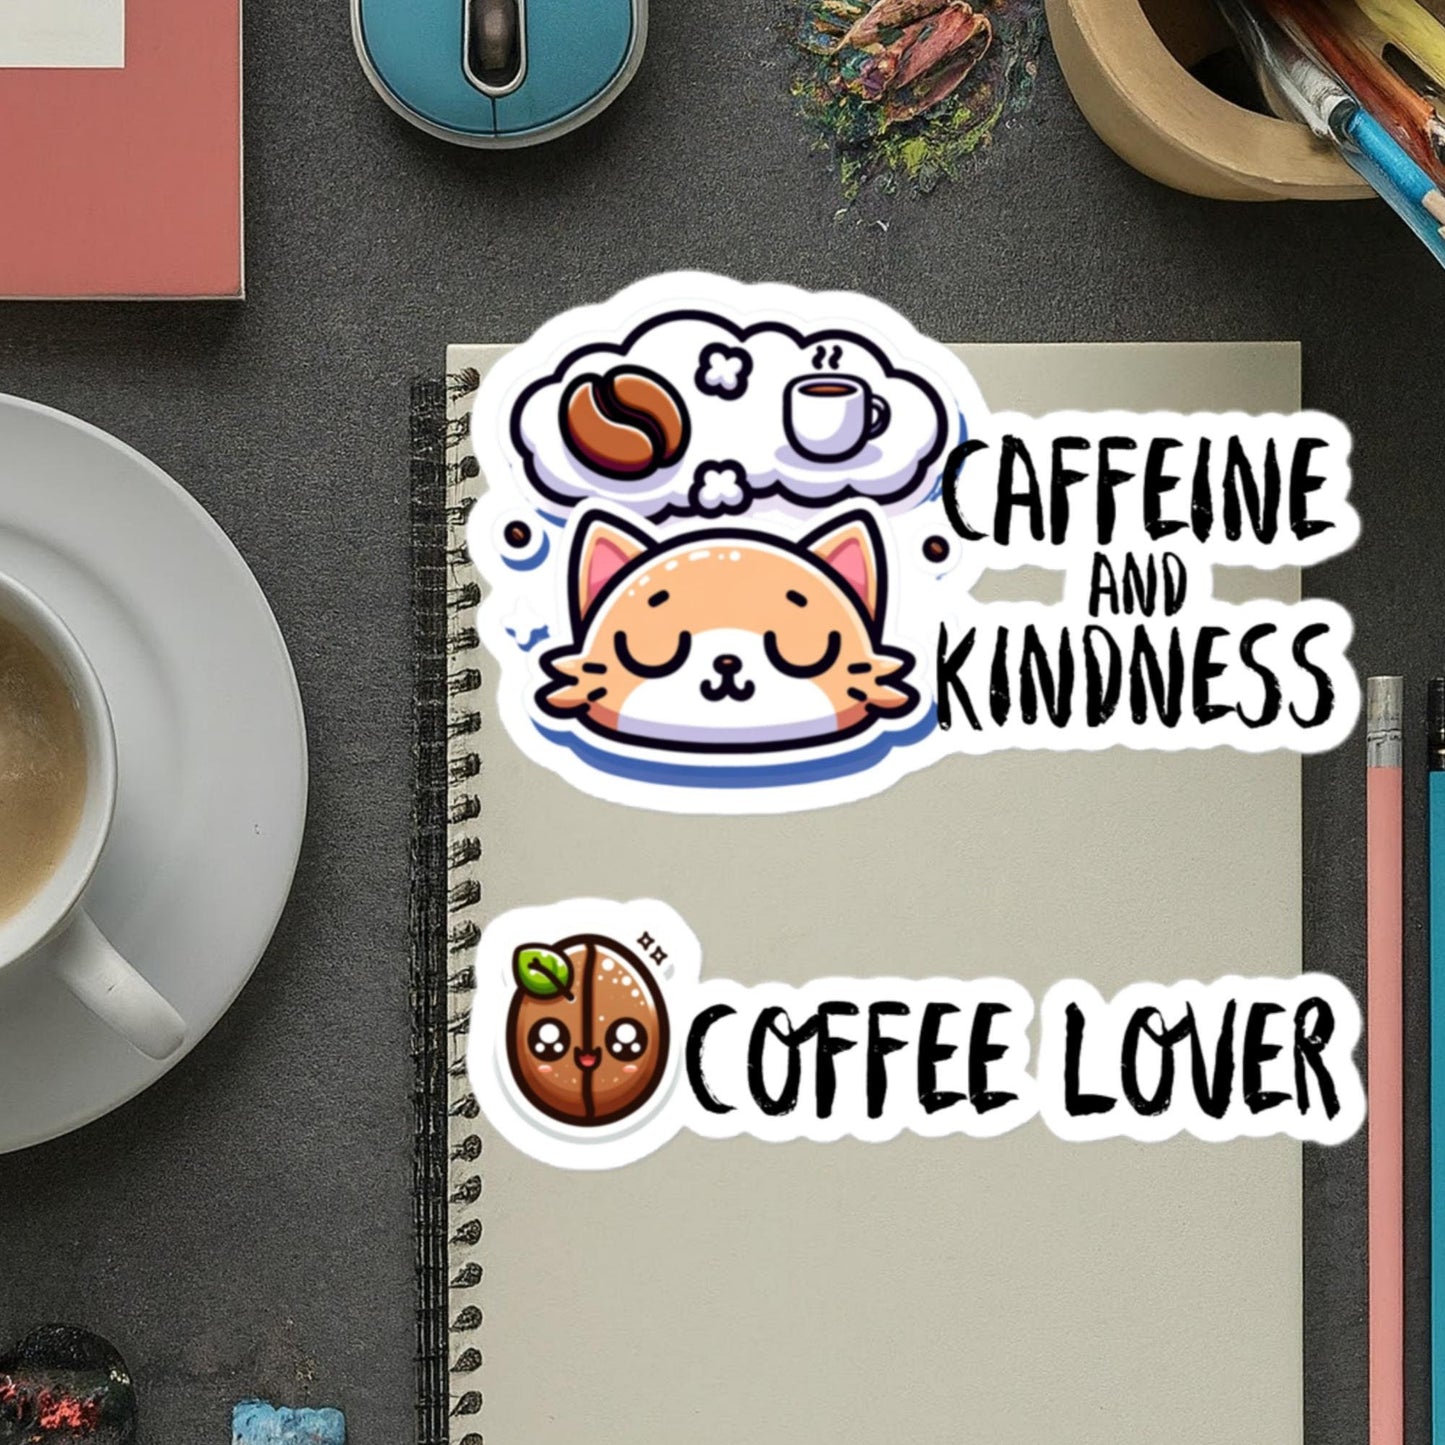 Stickers Coffee Humor Gifts Stickers Humor Coffee Lover Gift Ideas Stickers Coffee Funny Humor Gifts Stickers